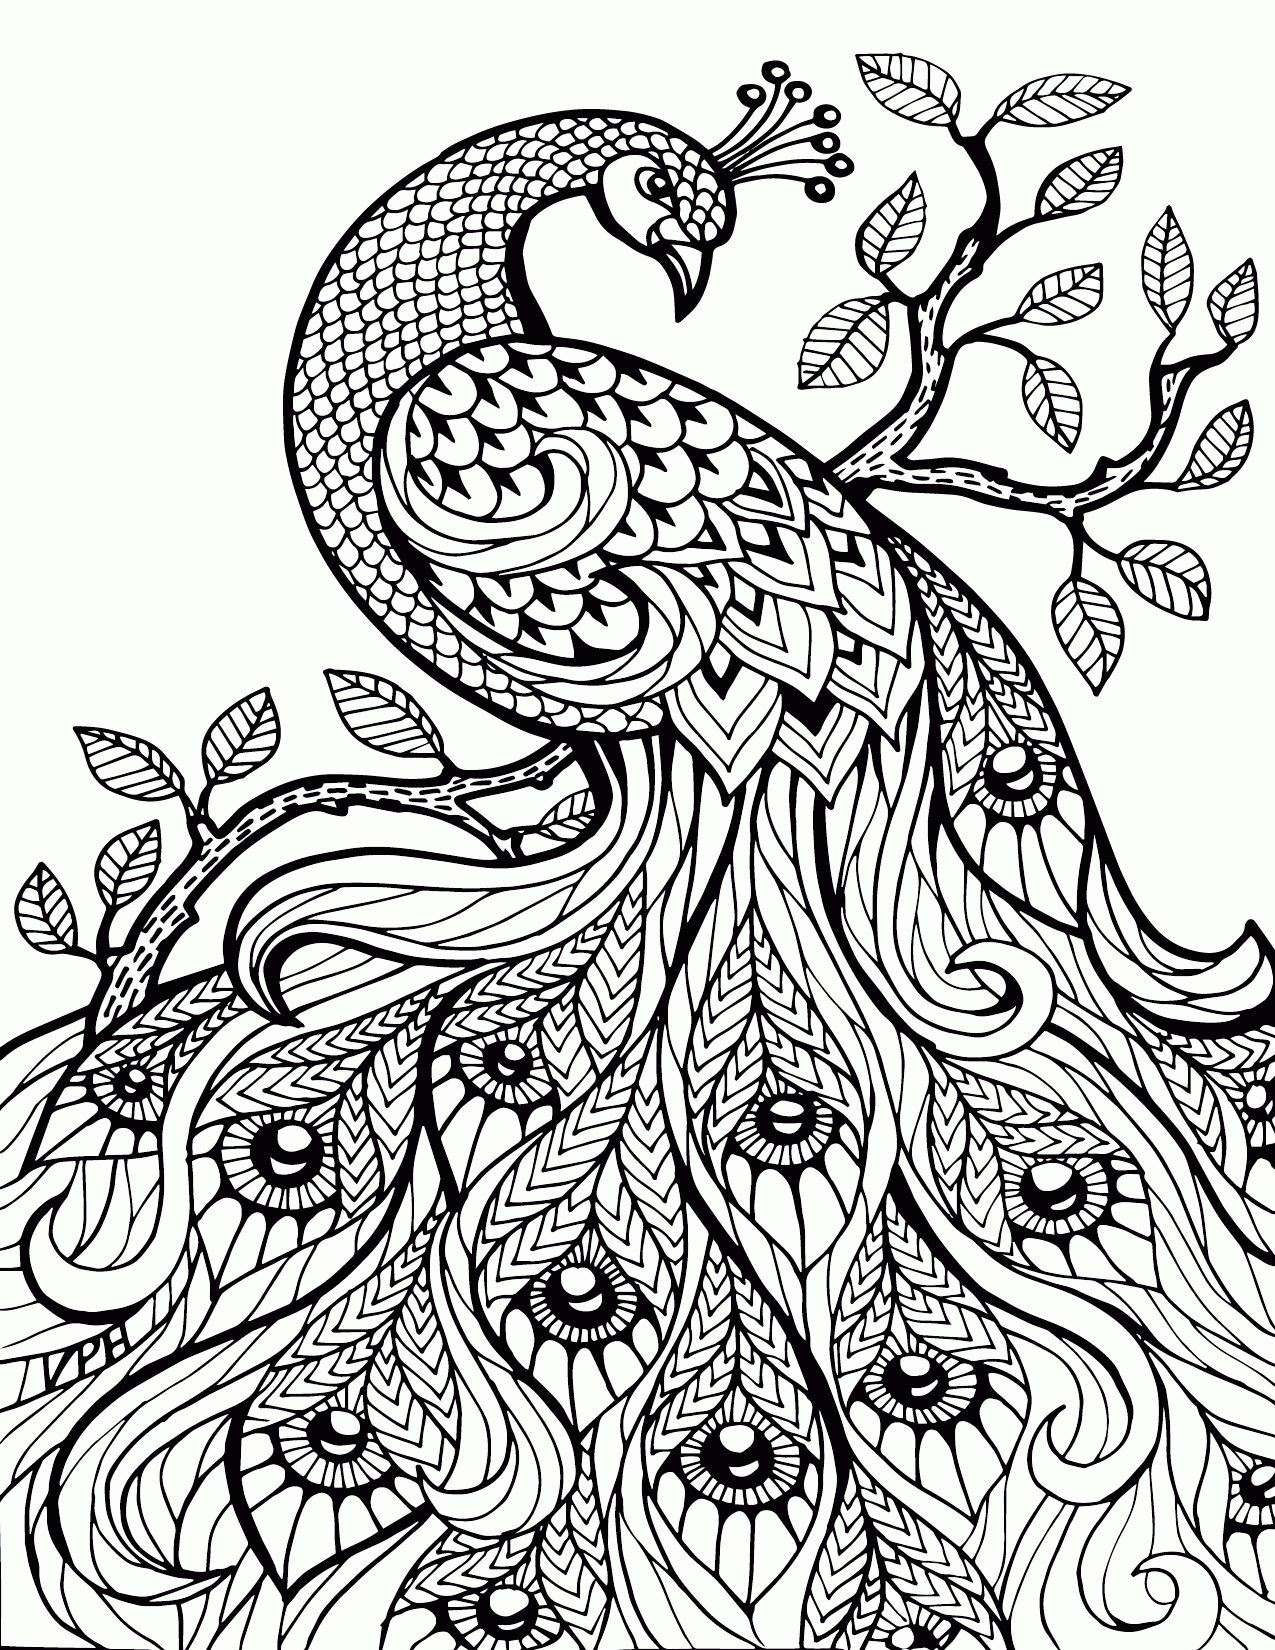 40 Collections Free Flowers Coloring Pages for Adults ...